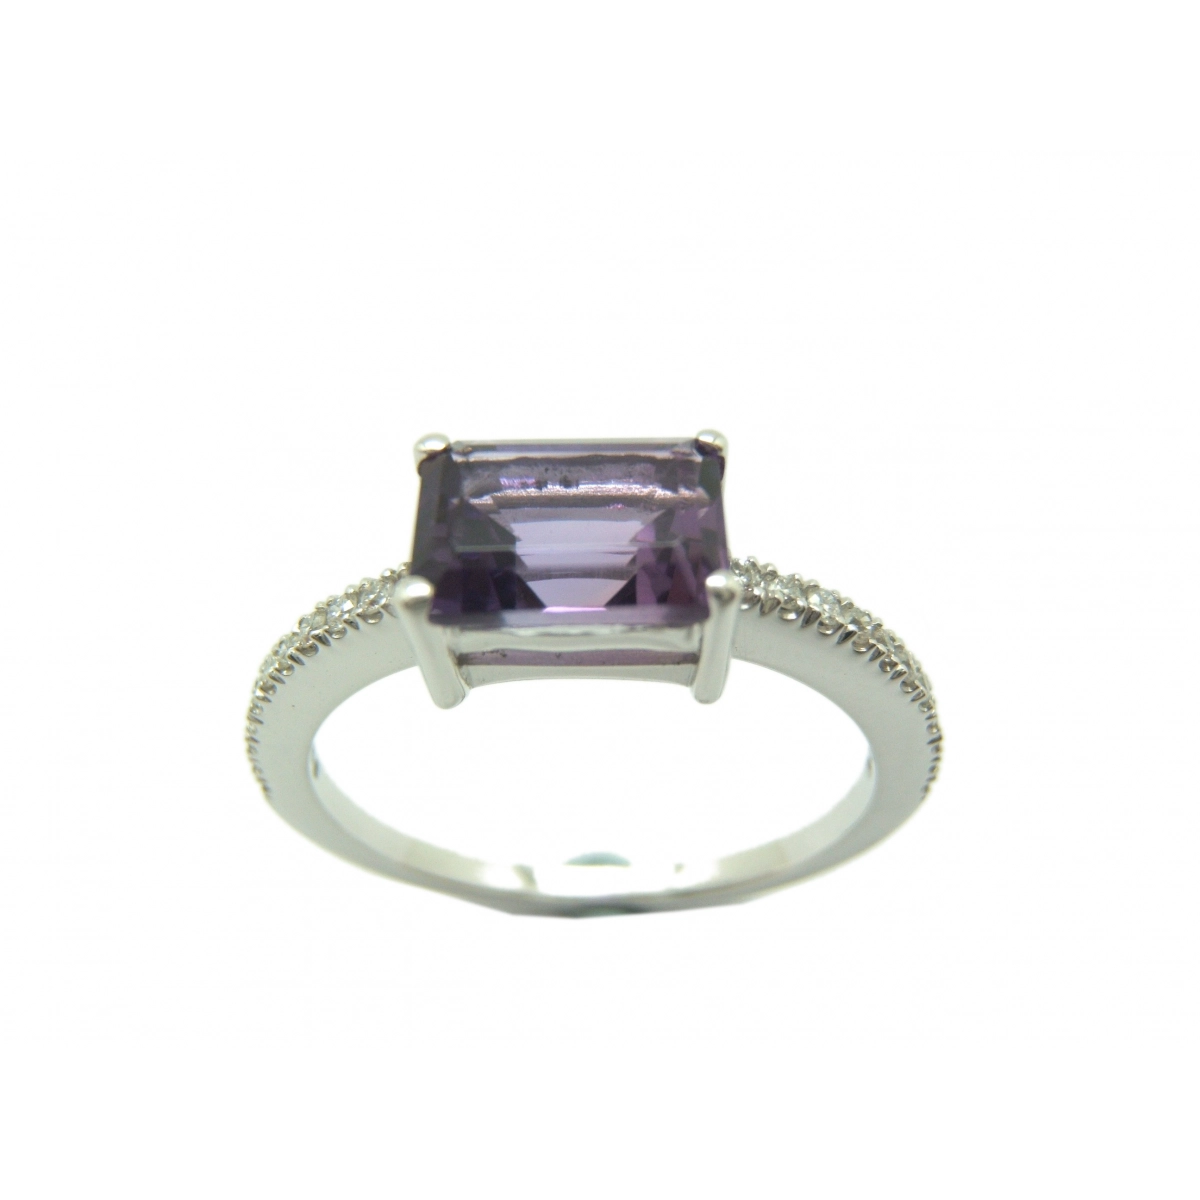 WHITE GOLD AMETHYST AND DIAMOND RING B-79 A-418